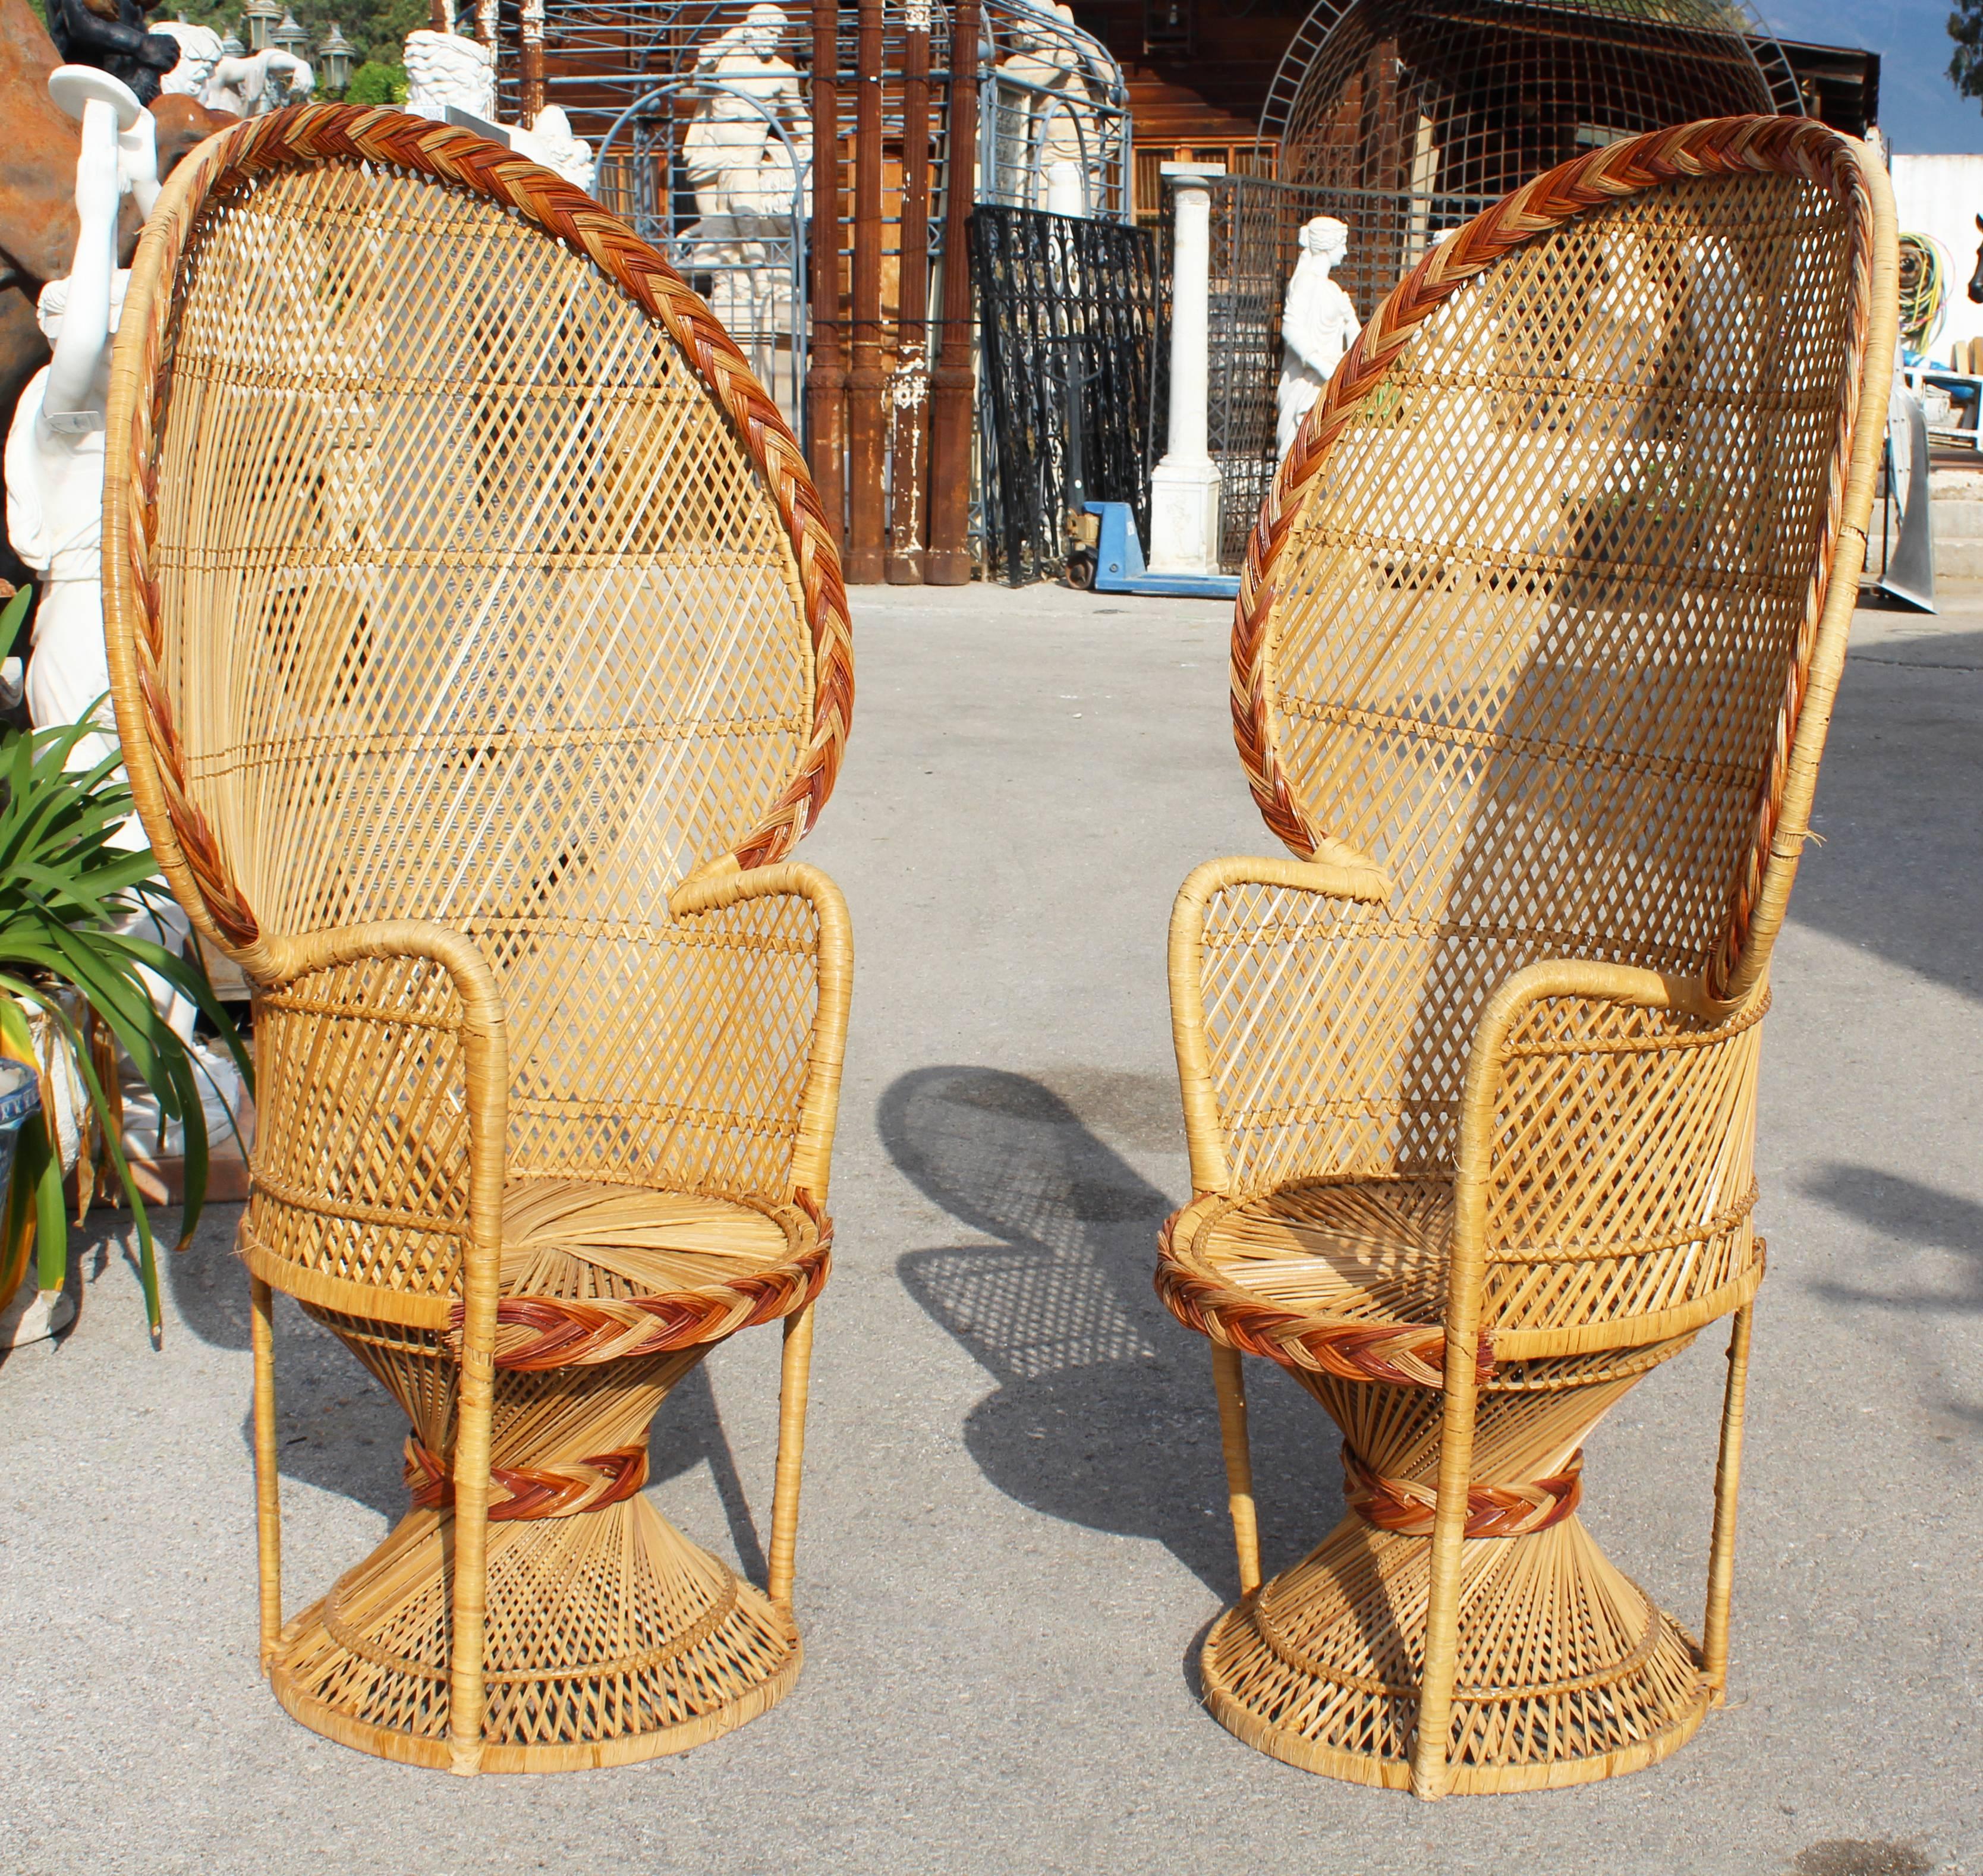 A large pair of vintage Bohemian high quality wicker peacock chairs, made famous in 1974 by actress Sylvia Kristel in the movie 'Emmanuelle' where she sat half naked.